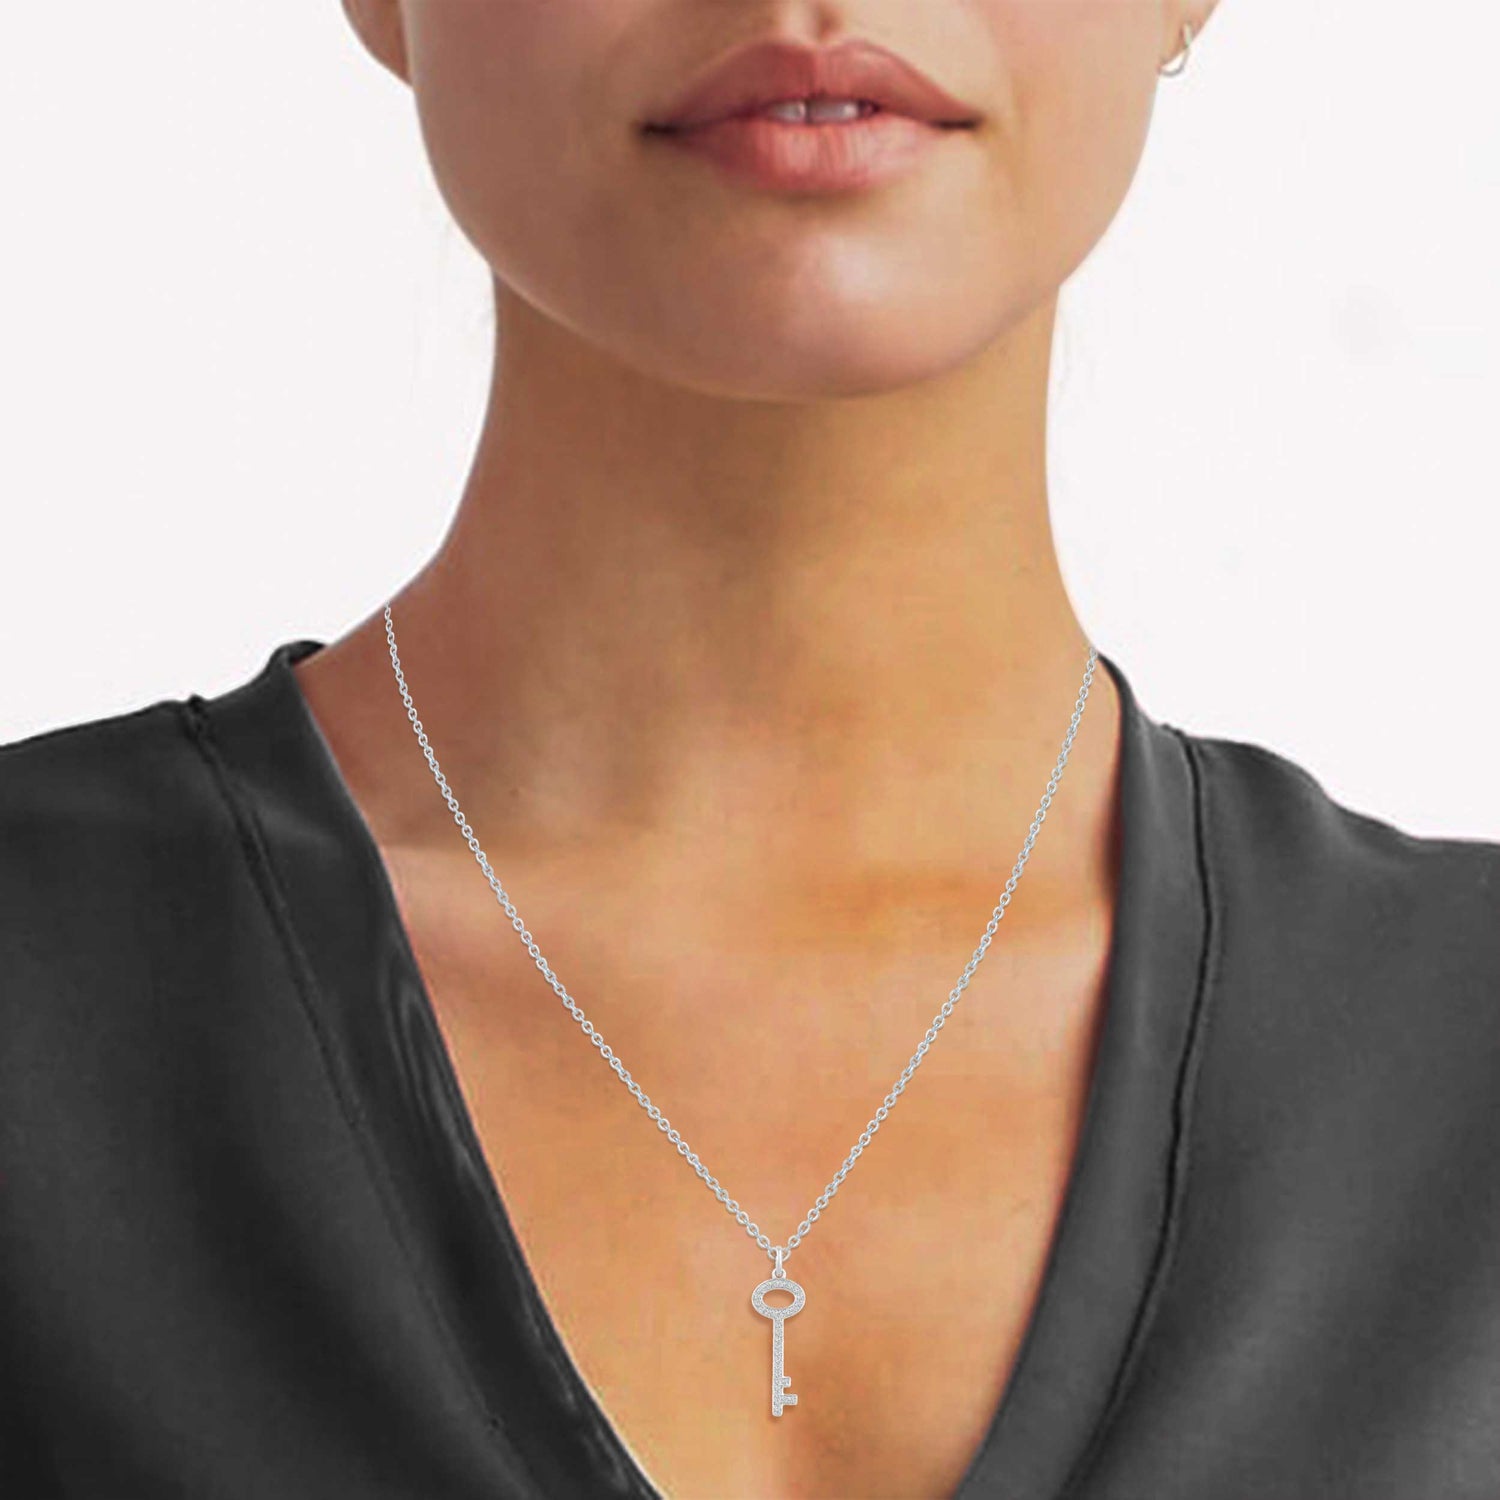 1/6CT TW Diamond Key Pendant in Sterling Silver with 18in Cable Chain